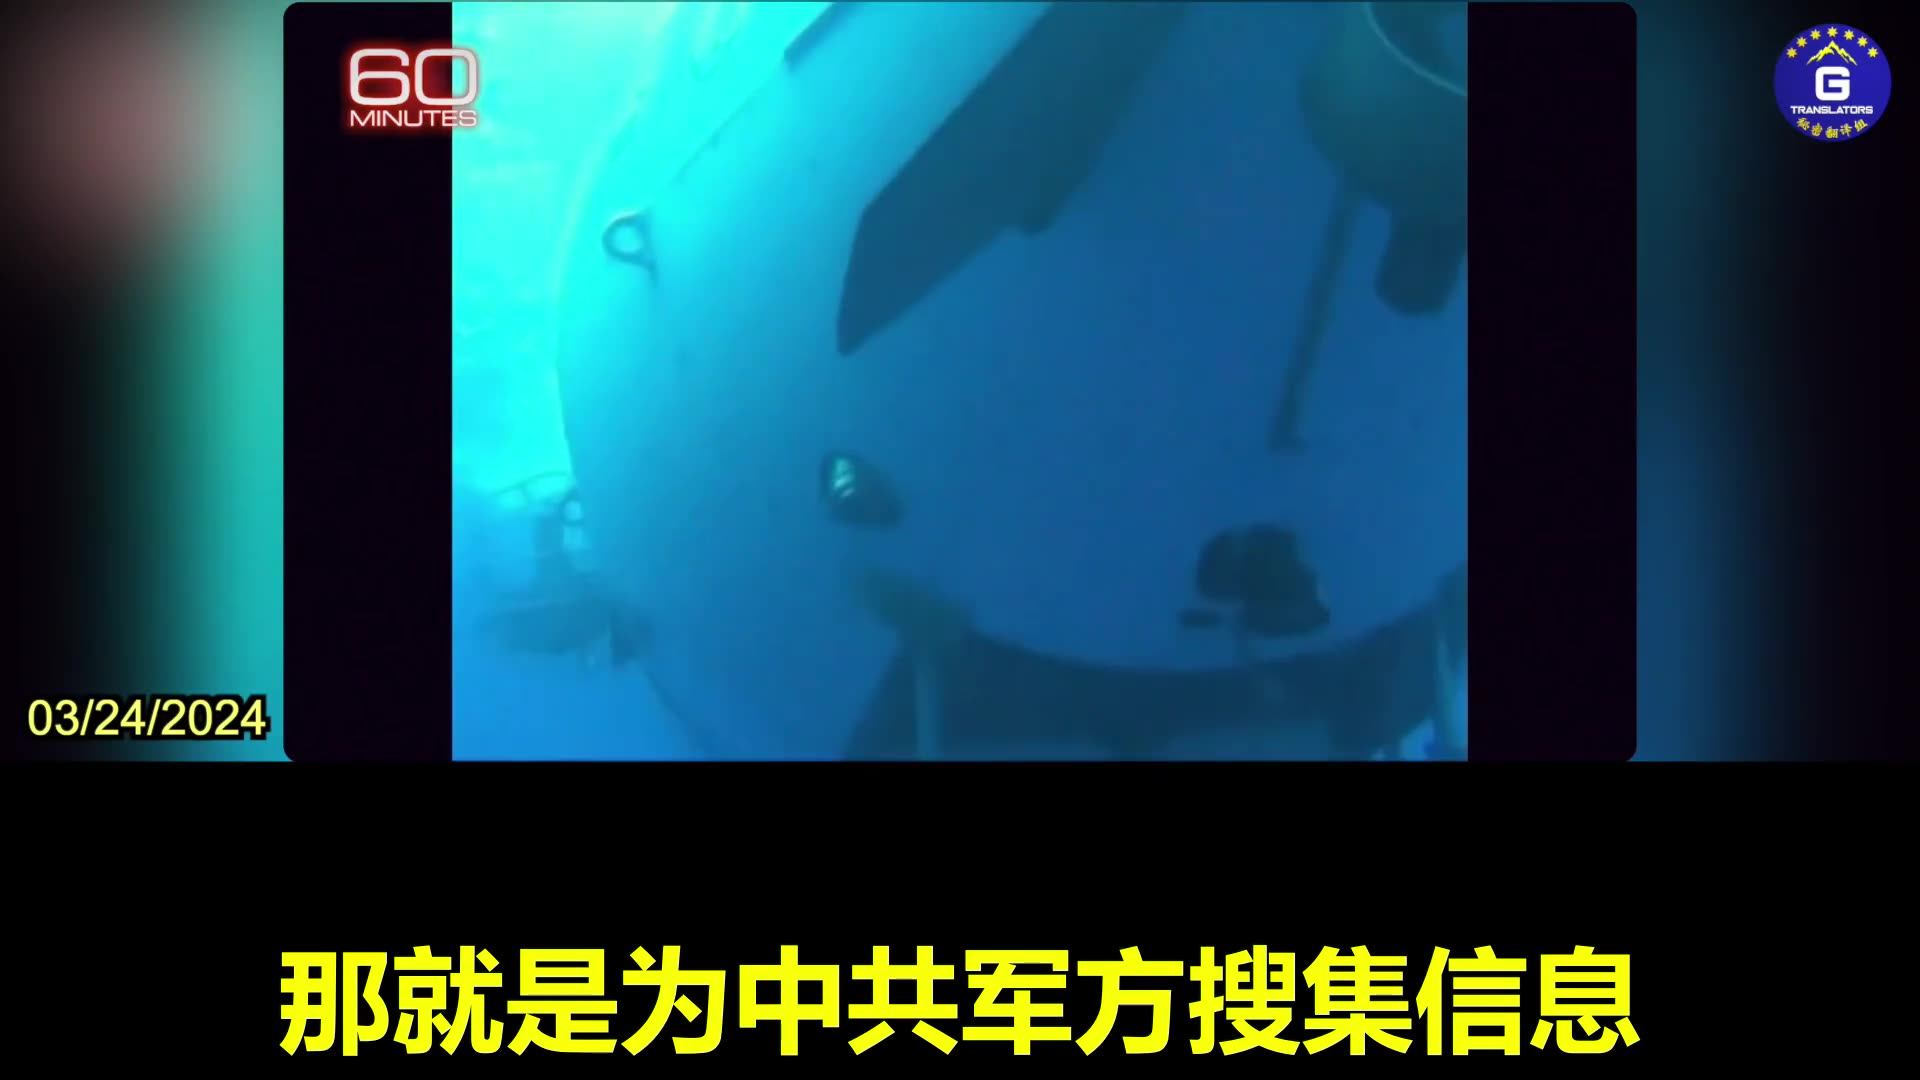 CCP's Deep-Sea Miners Have a Second Mission, Collecting Information for the Chinese Military